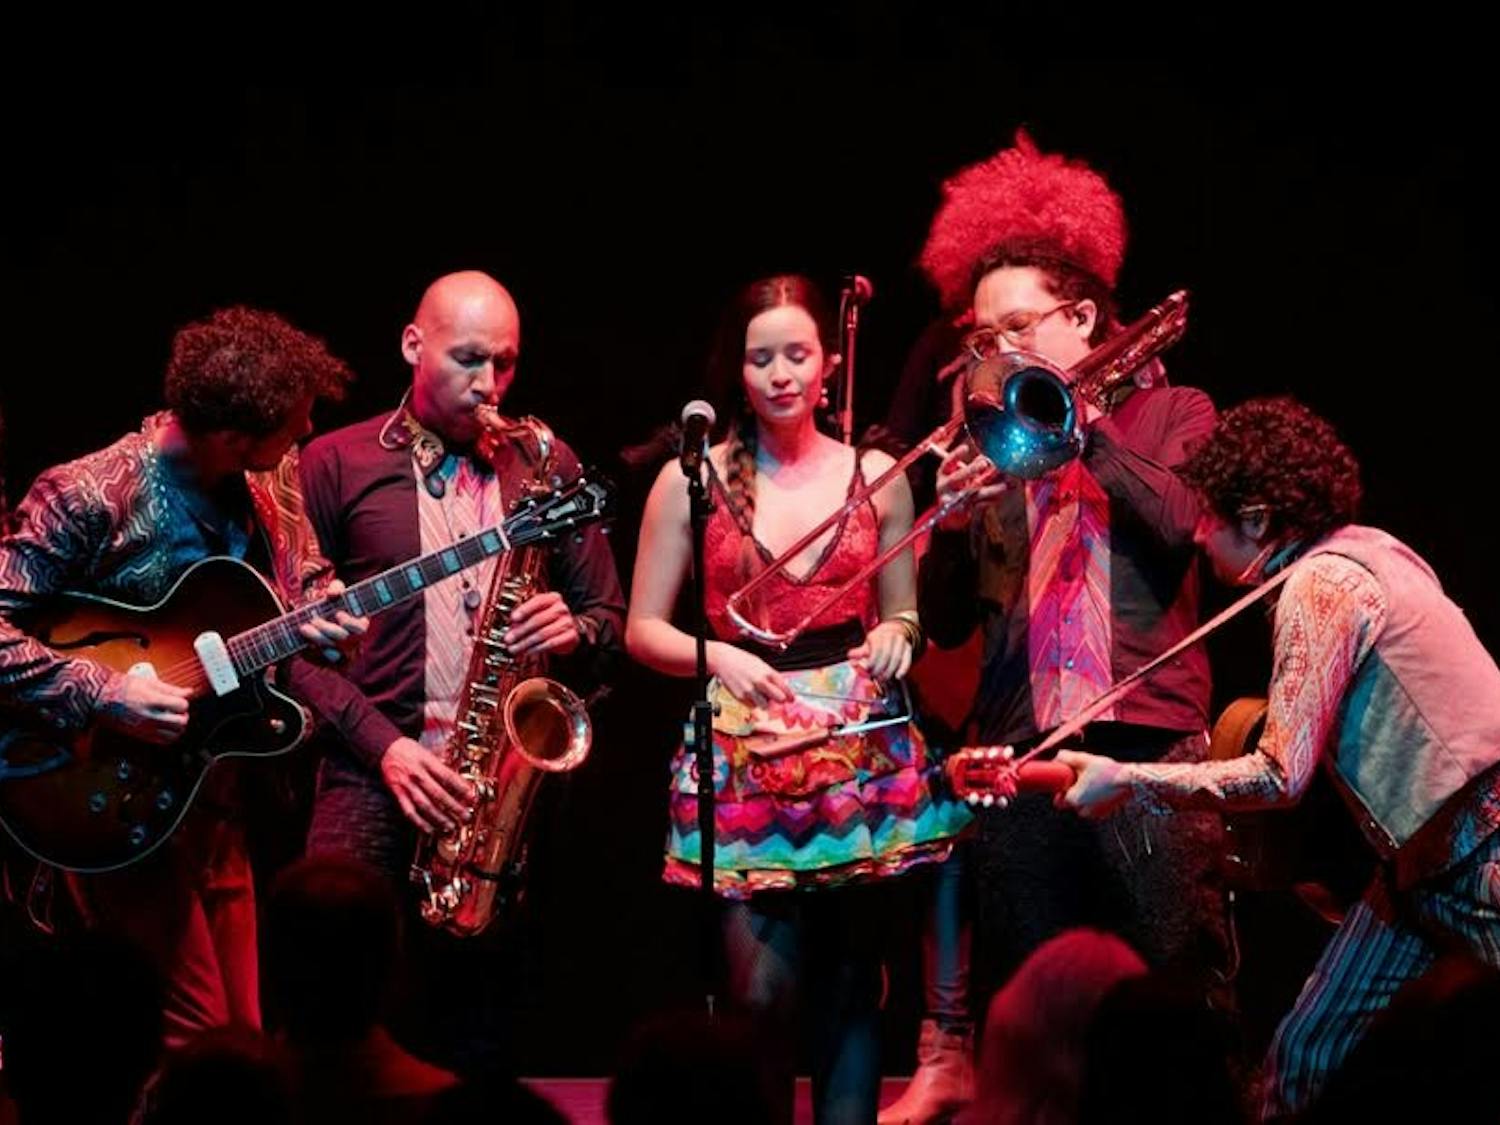 Monsieur Periné, a Bogota-based group, performed at the Center for the Arts twice on Tuesday night. The group won the 2015 “Best New Artist” category at the Latin Grammy Awards.